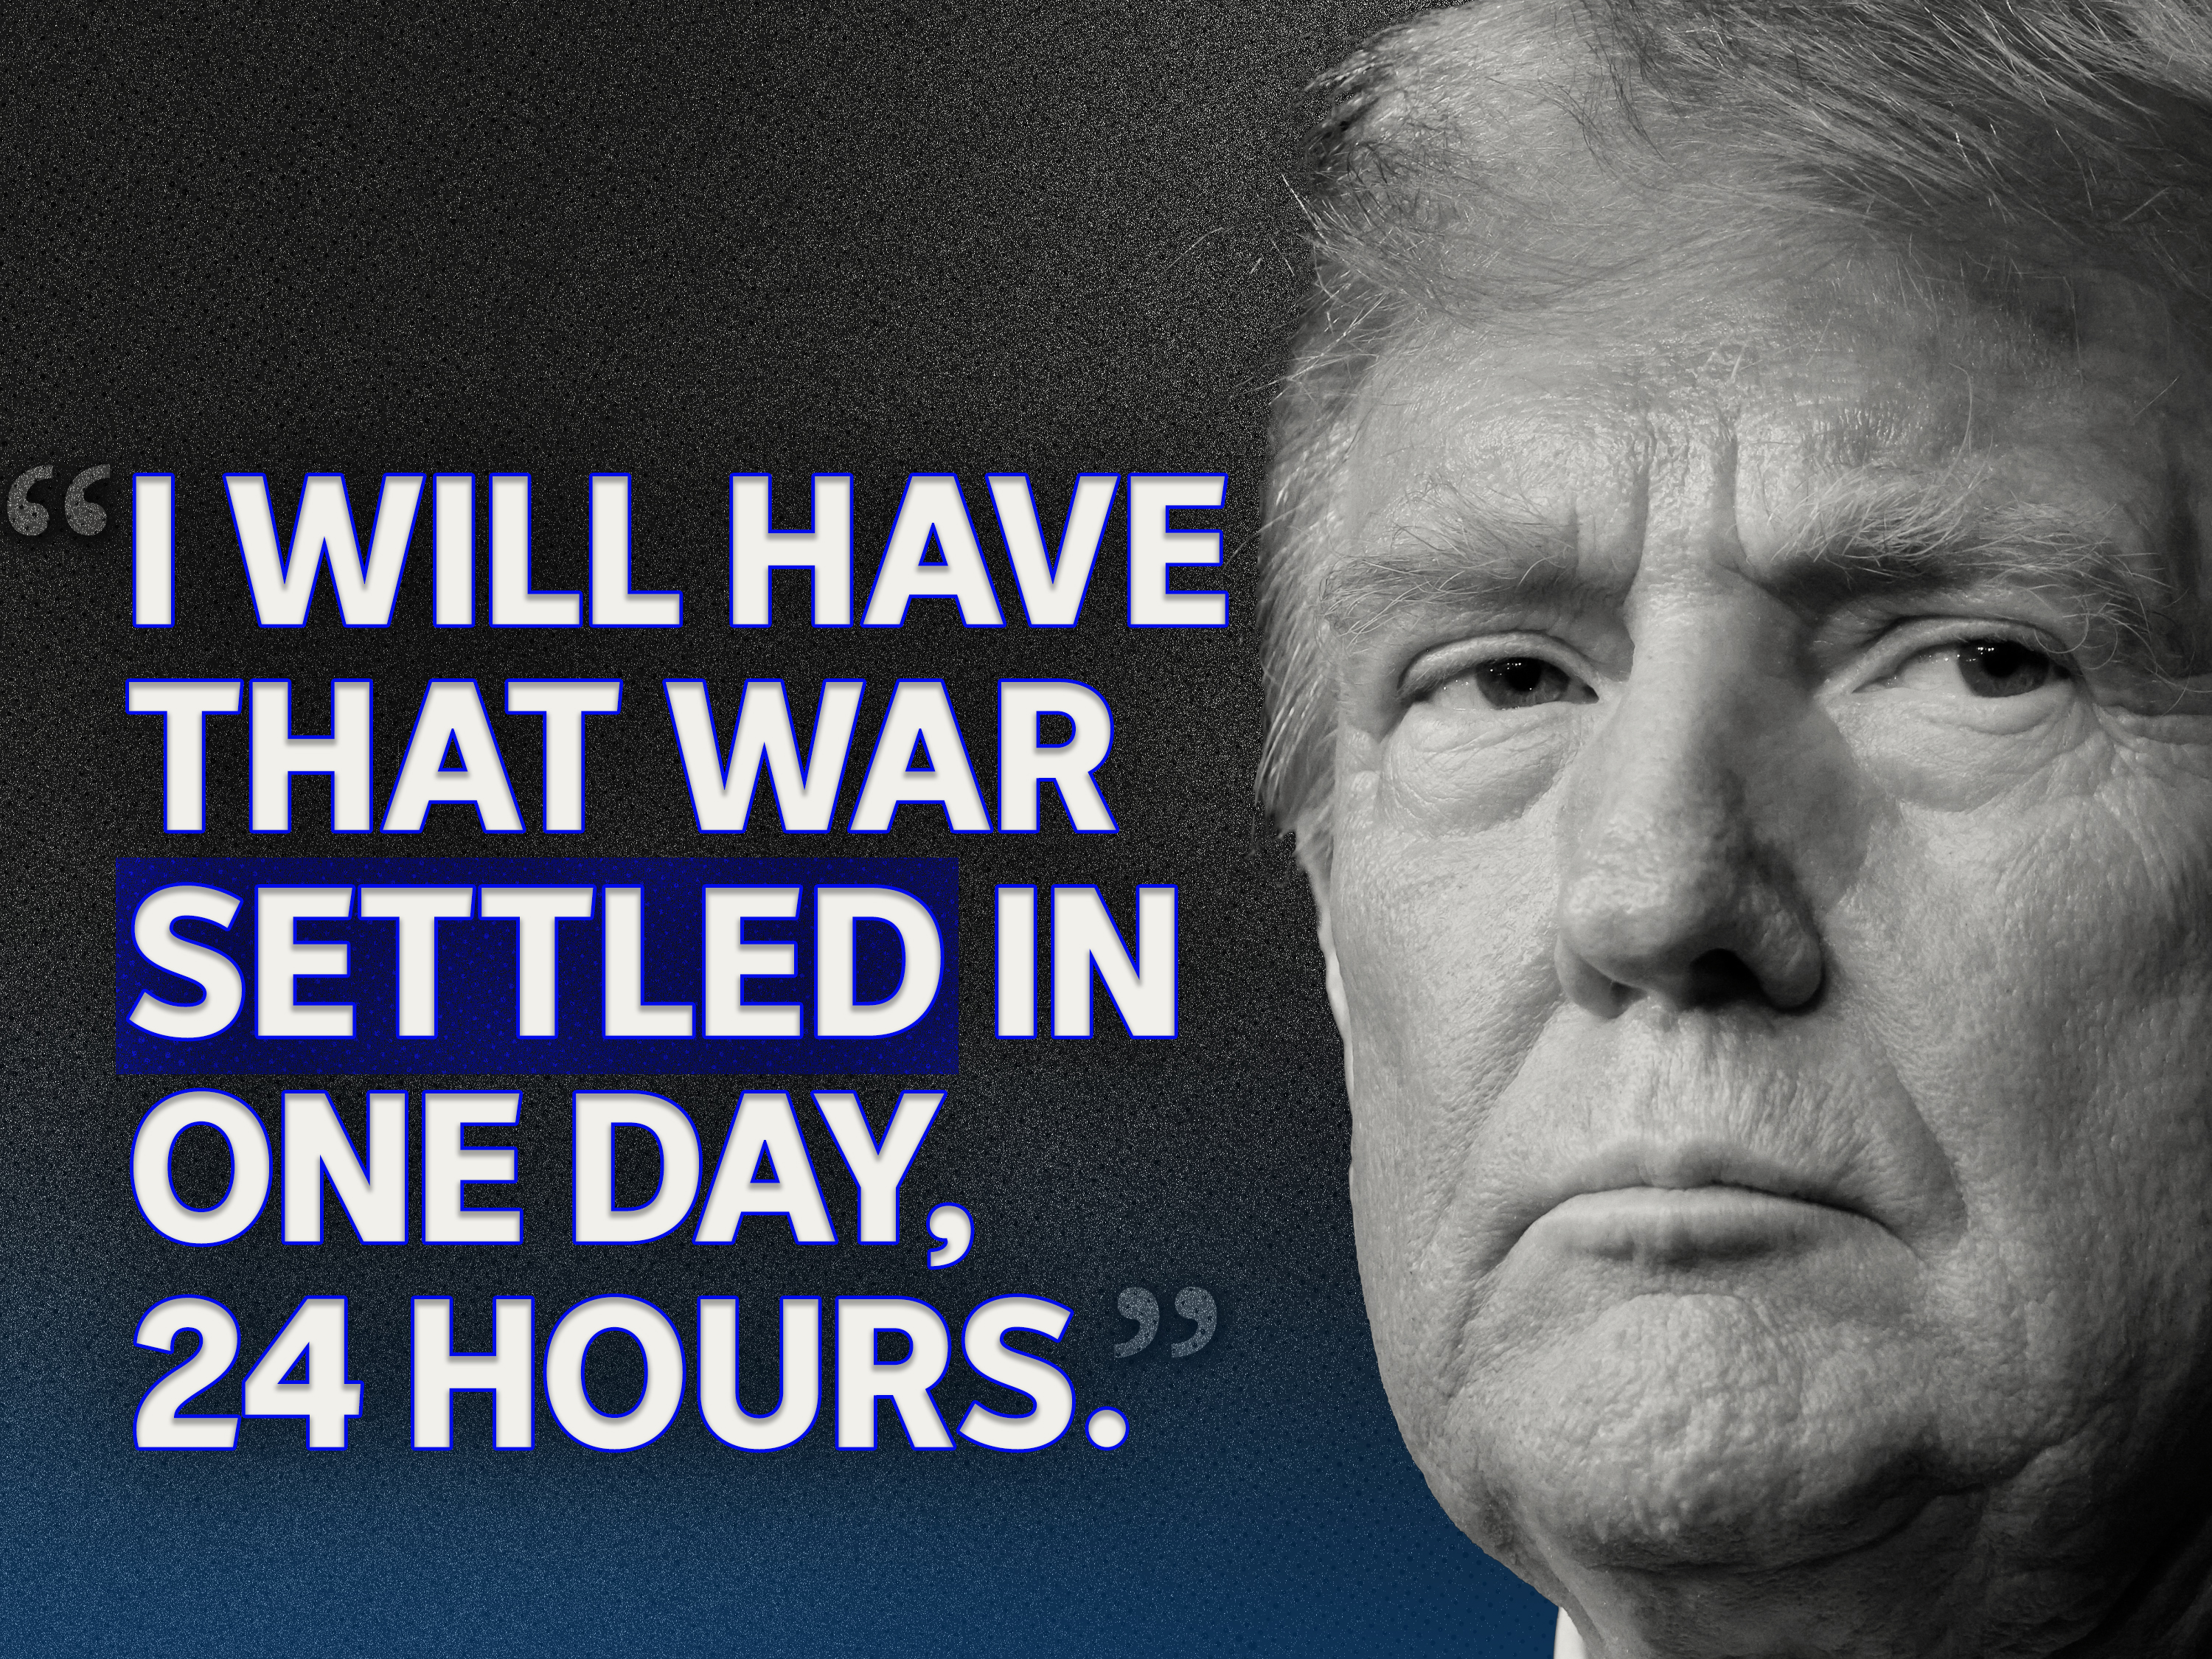 Donald Trump pictured with the words: I will have that war settled in one day, 24 hours.